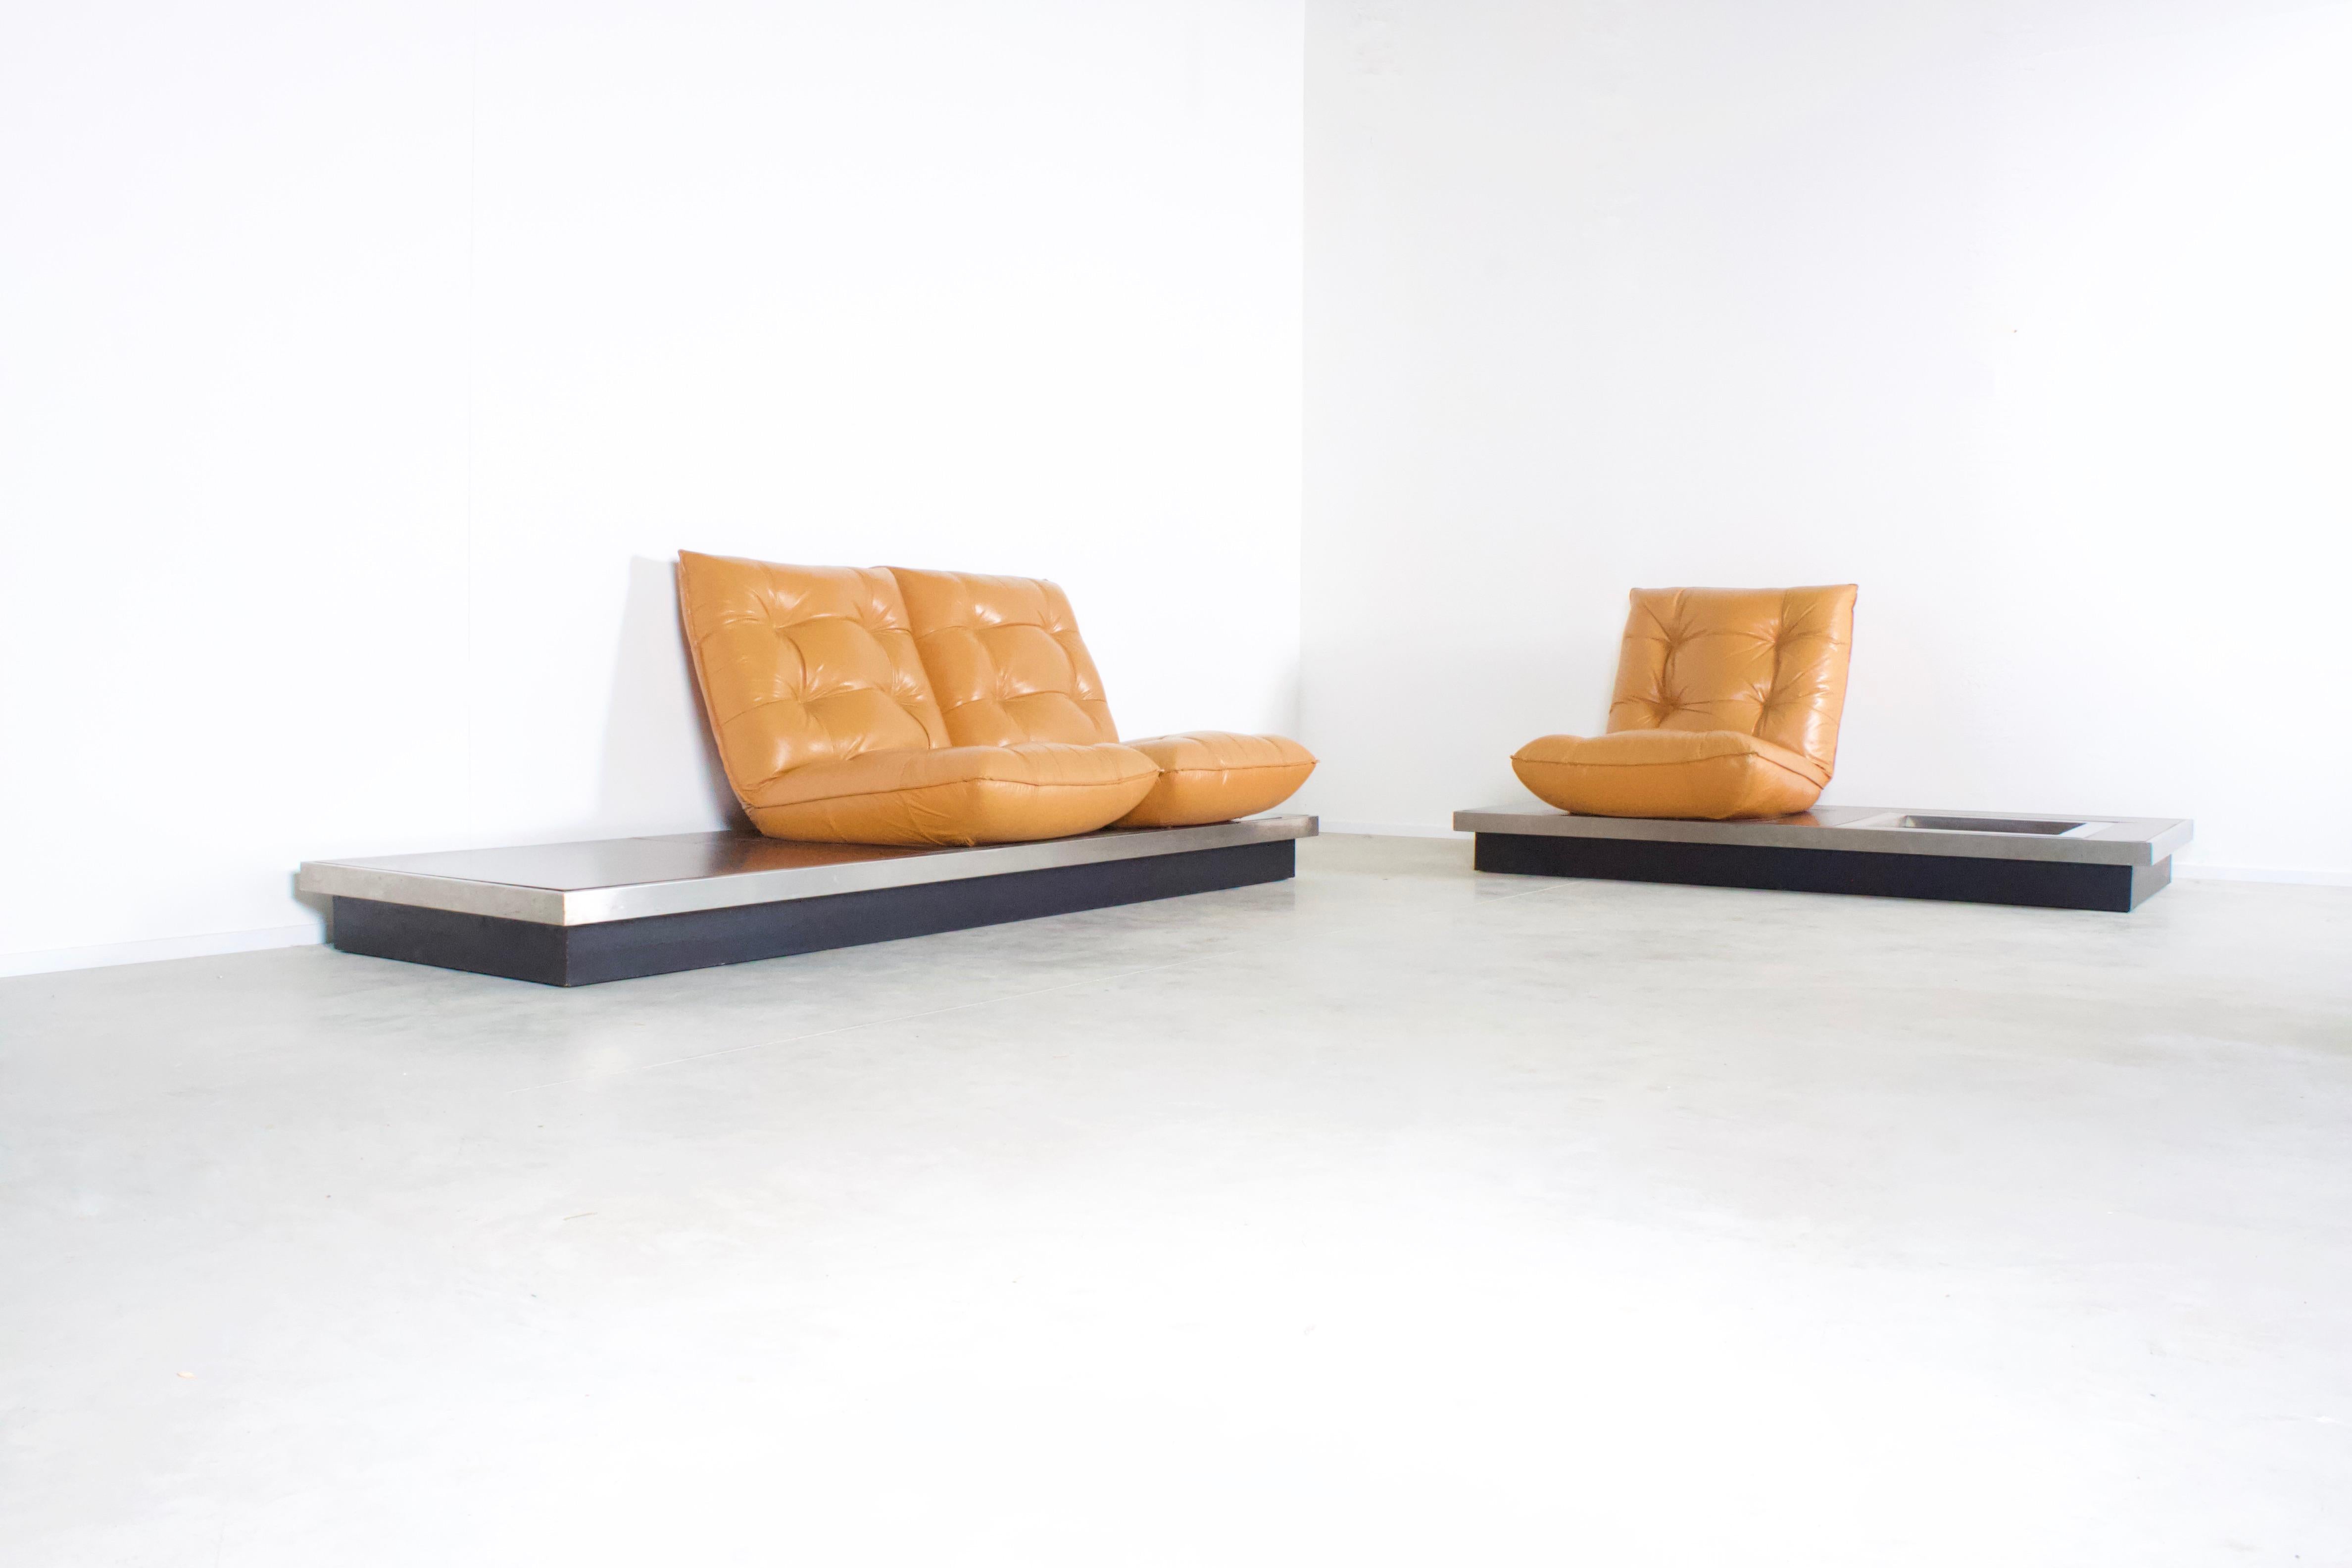 Set of ultra rare Michel Ducaroy platform sofas in very good condition.

Manufactured in France in the 1970s 

The sofas consist of a low platform made of black laminated wood and a stainless steal frame.

The platform carries comfortable cognac